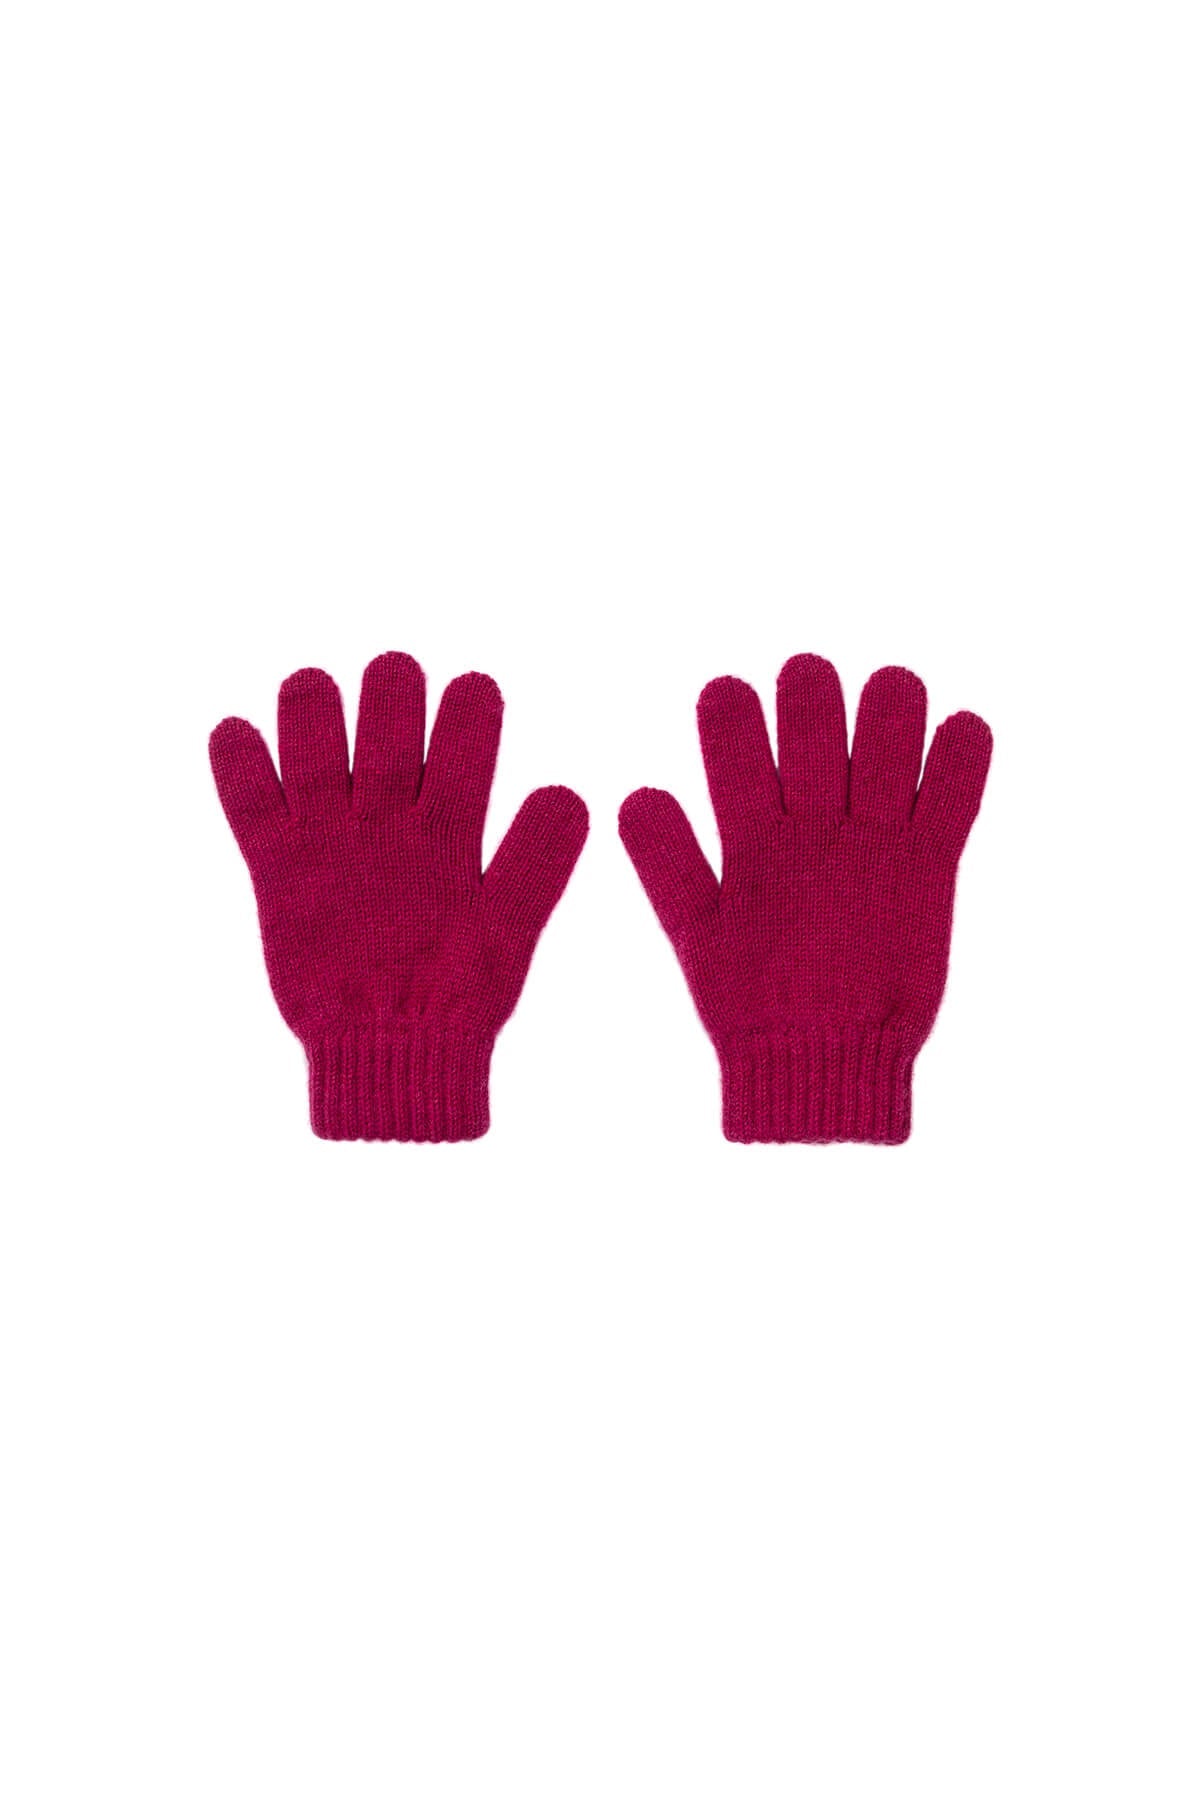 Johnstons of Elgin Children's Cashmere Gloves in Mulberry on white background HAD02203SE4770